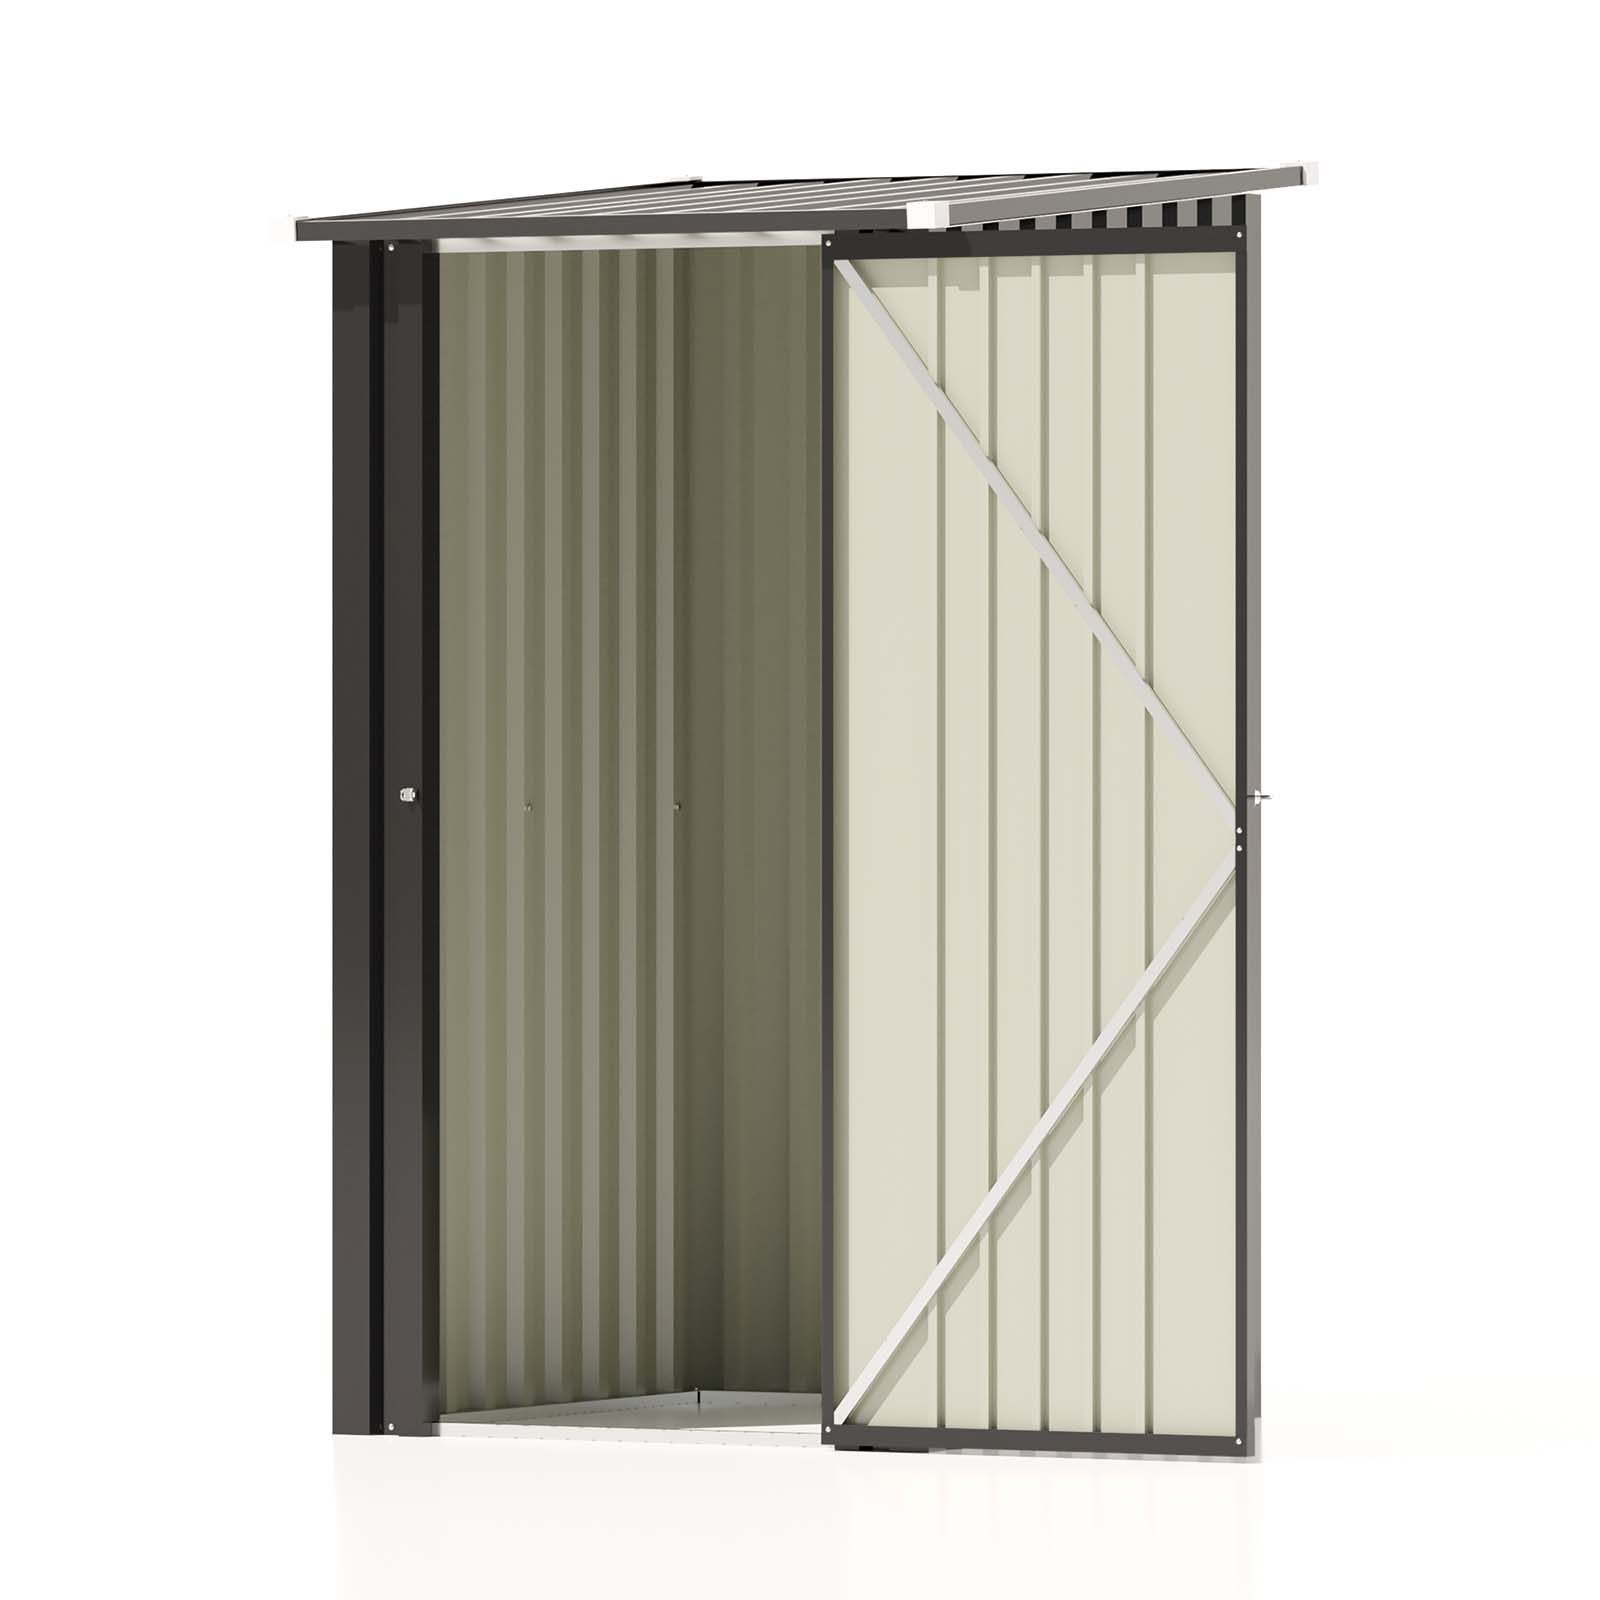 Patiowell 3x3 Metal Shed-1